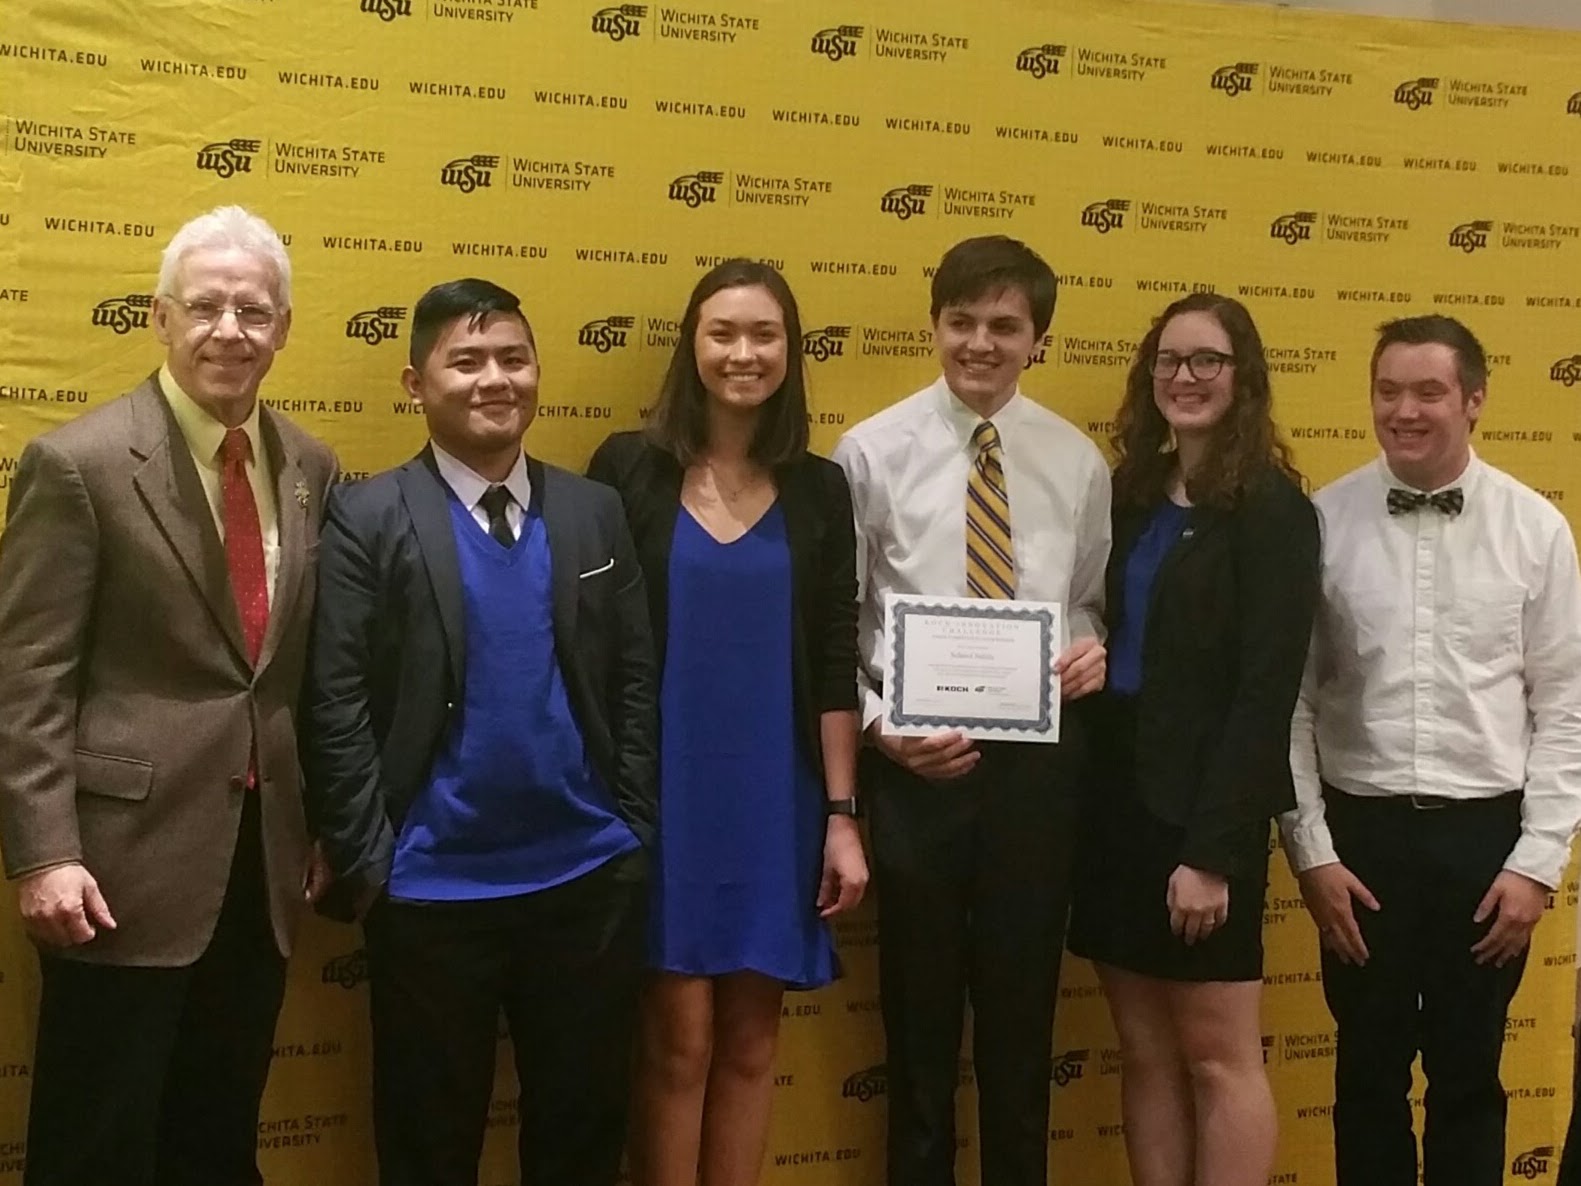 One of the winning teams from Wichita State University's Koch Innovation Challenge.